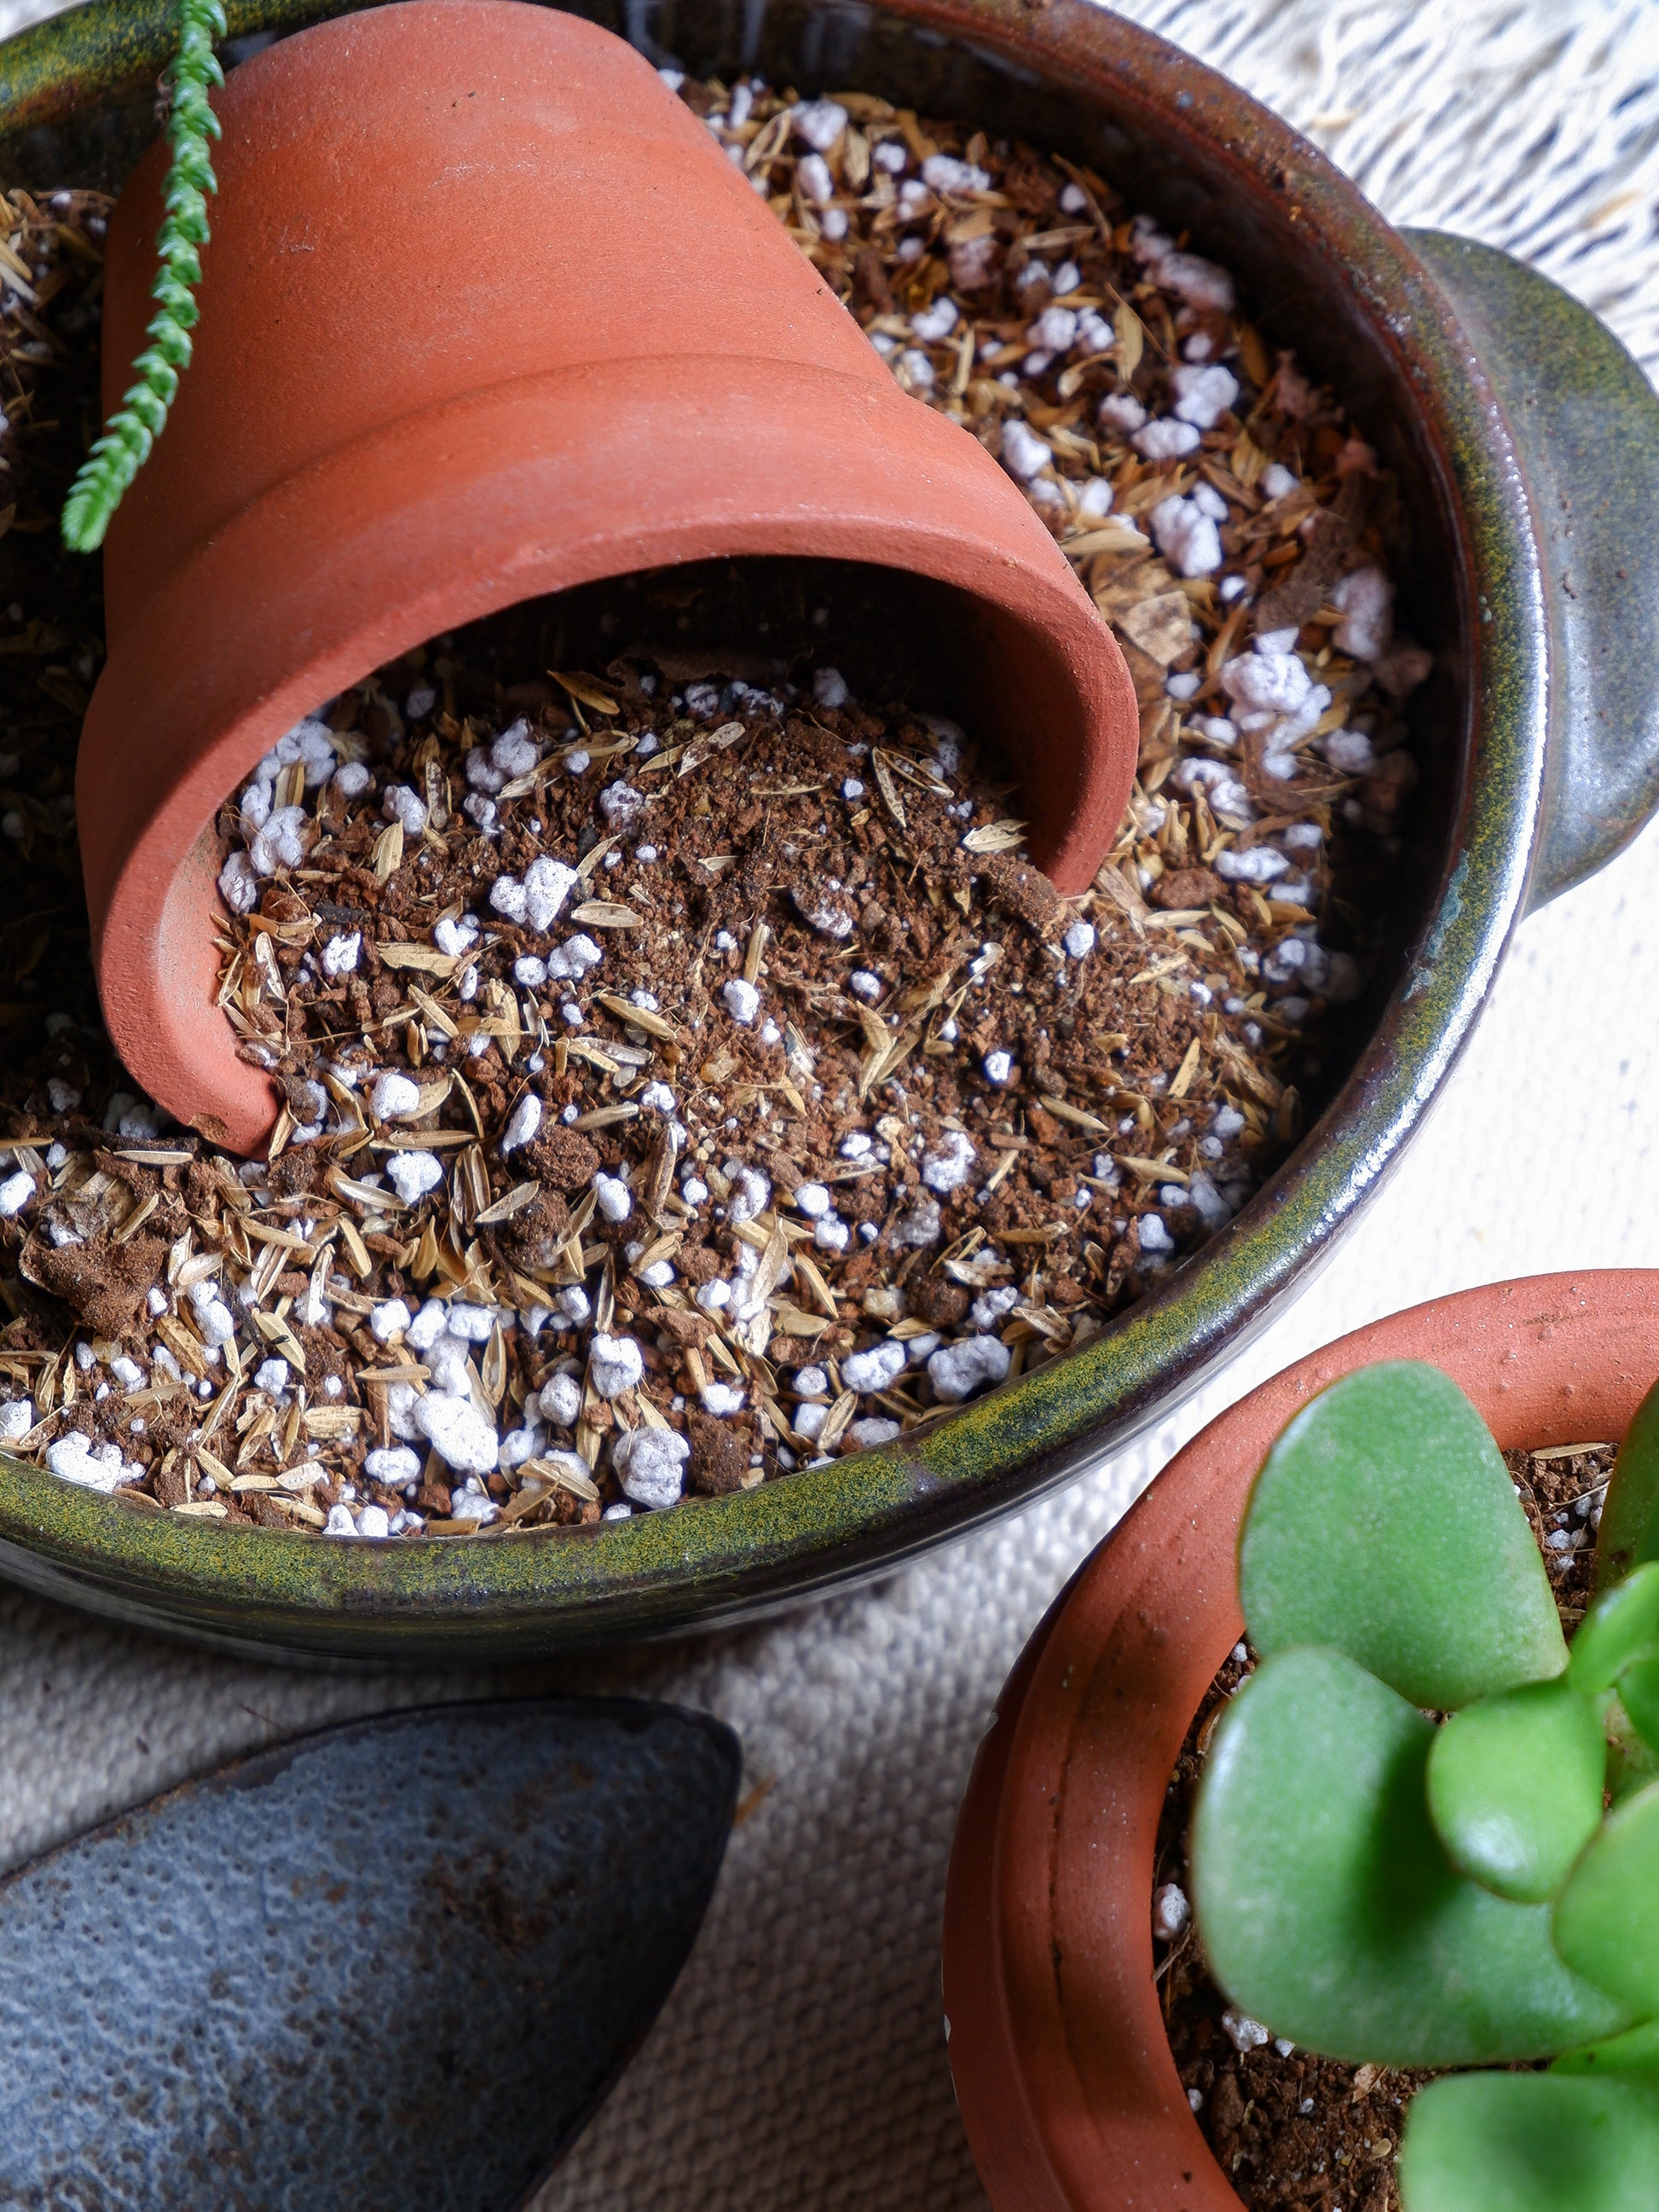 Shop online our best succulent, Cactus Soil Mix for your cactus and succulents delivered all India.